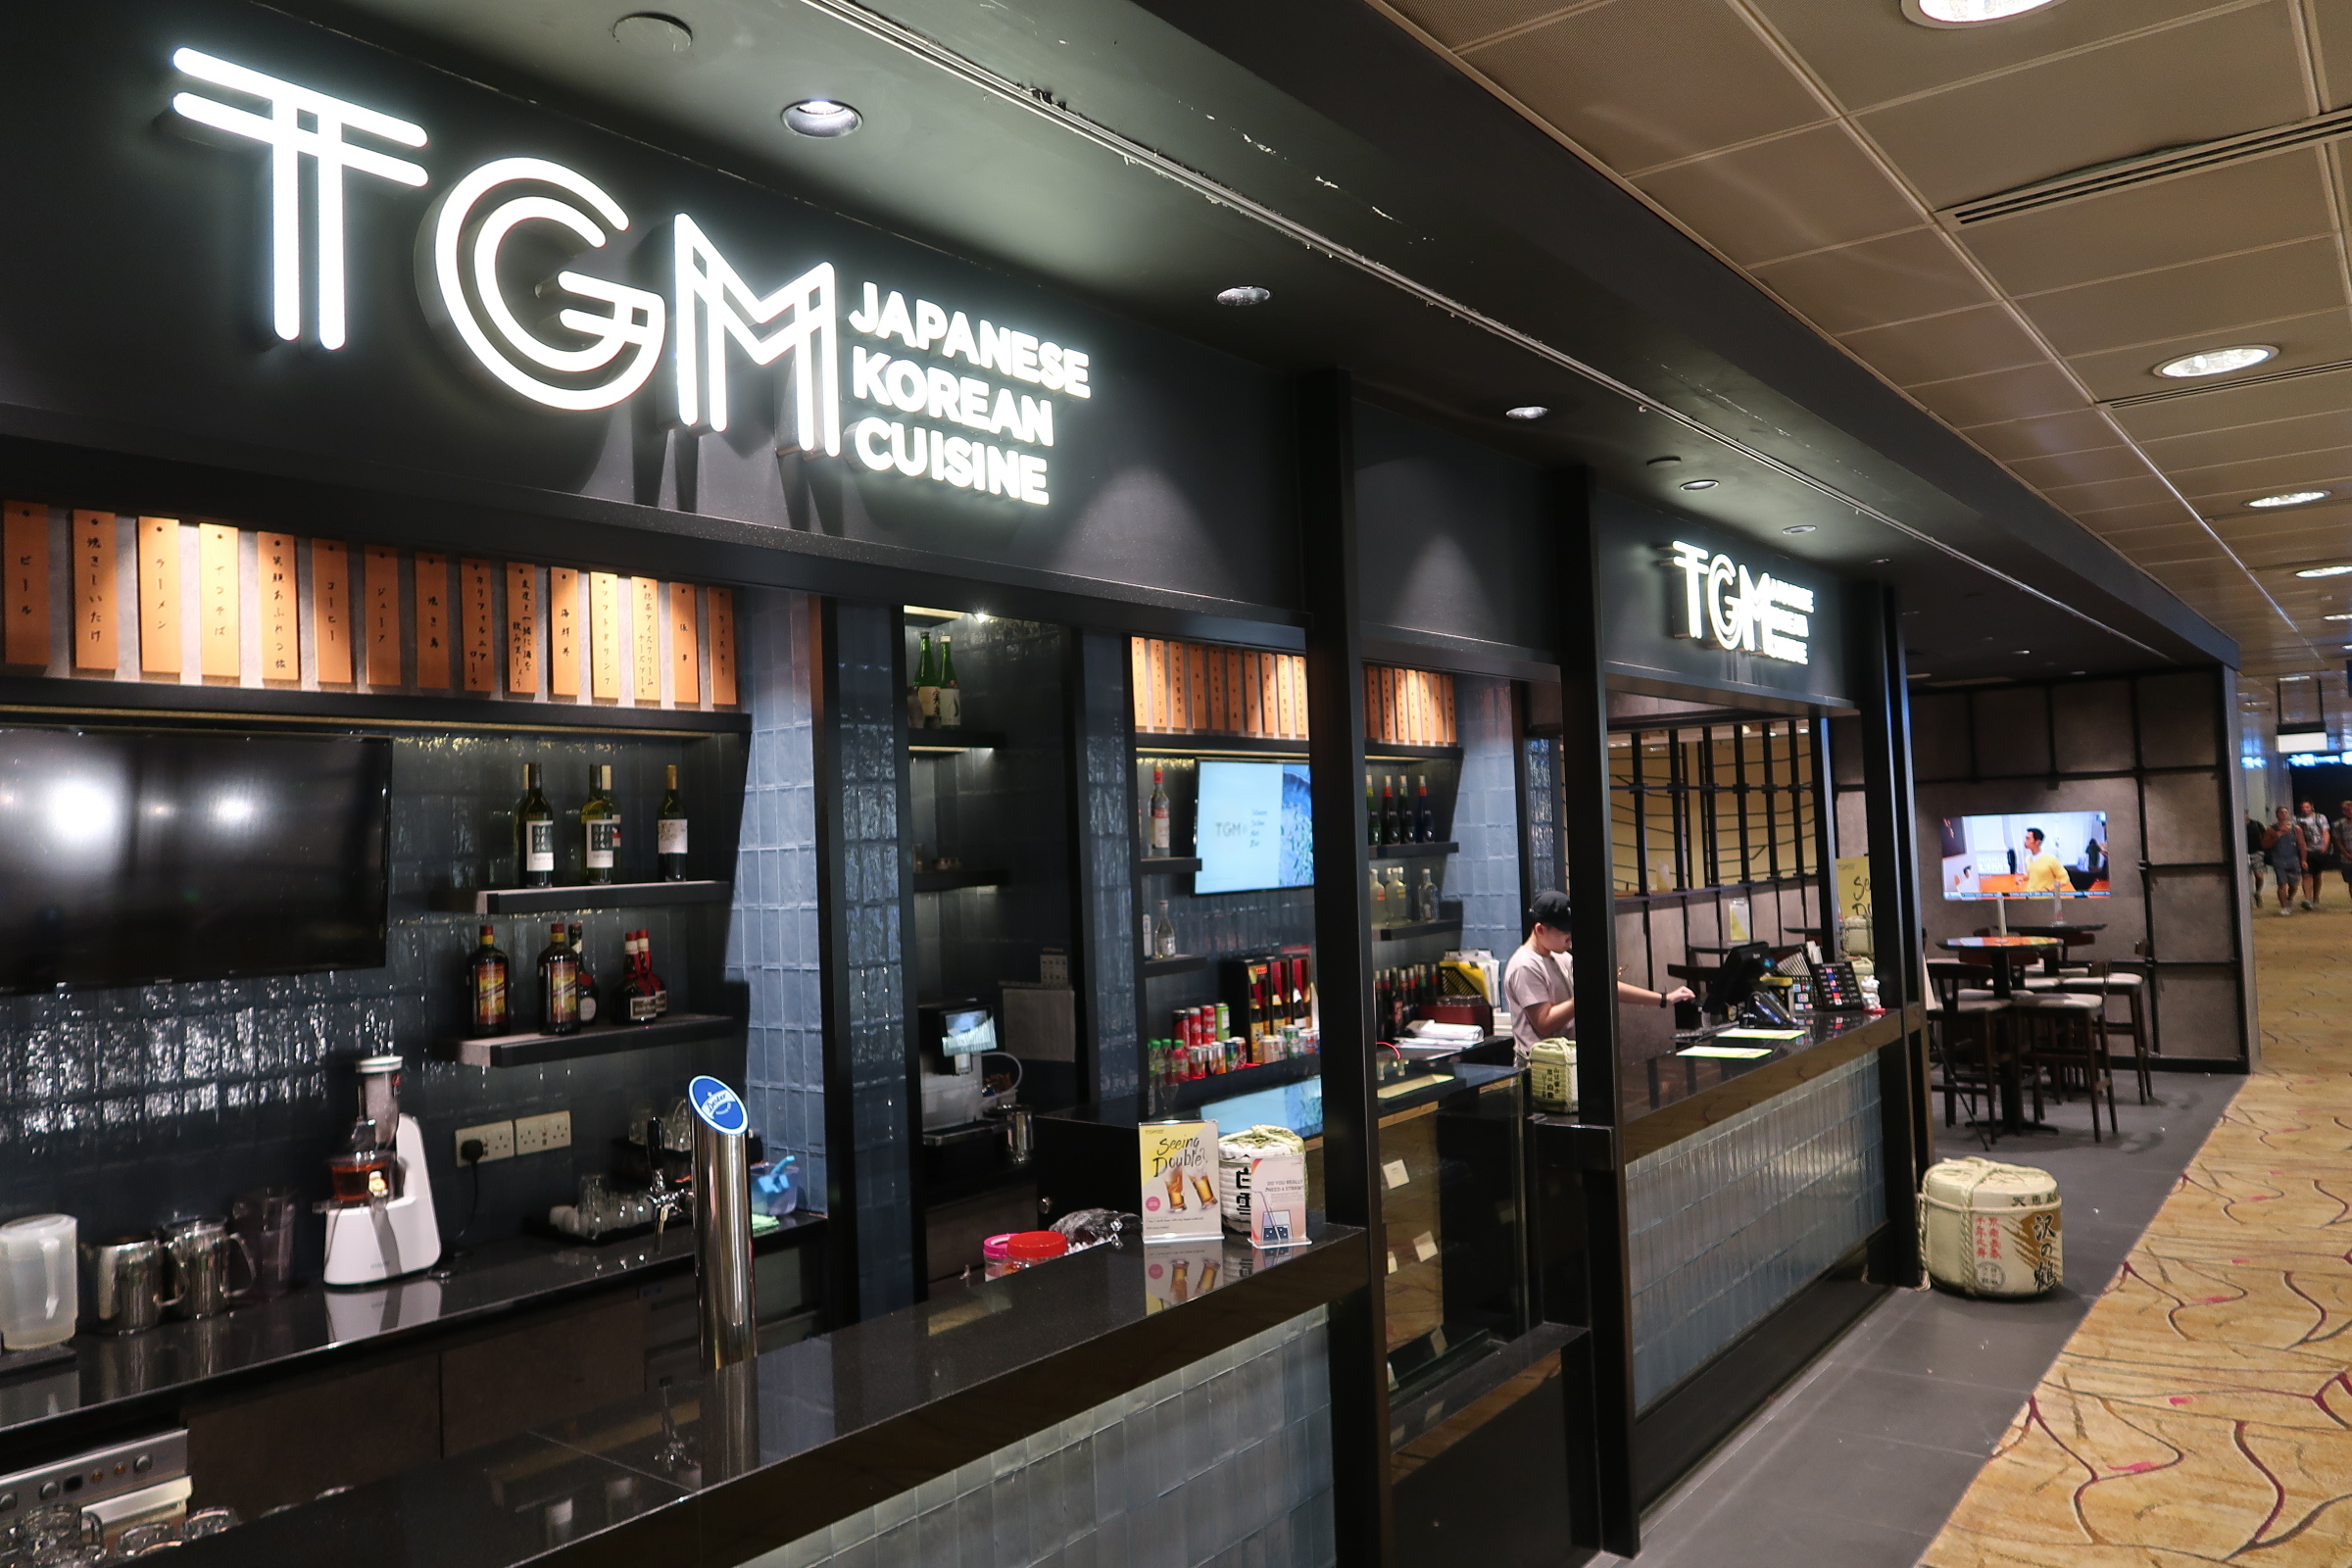 TGM Priority Pass Lounge Review